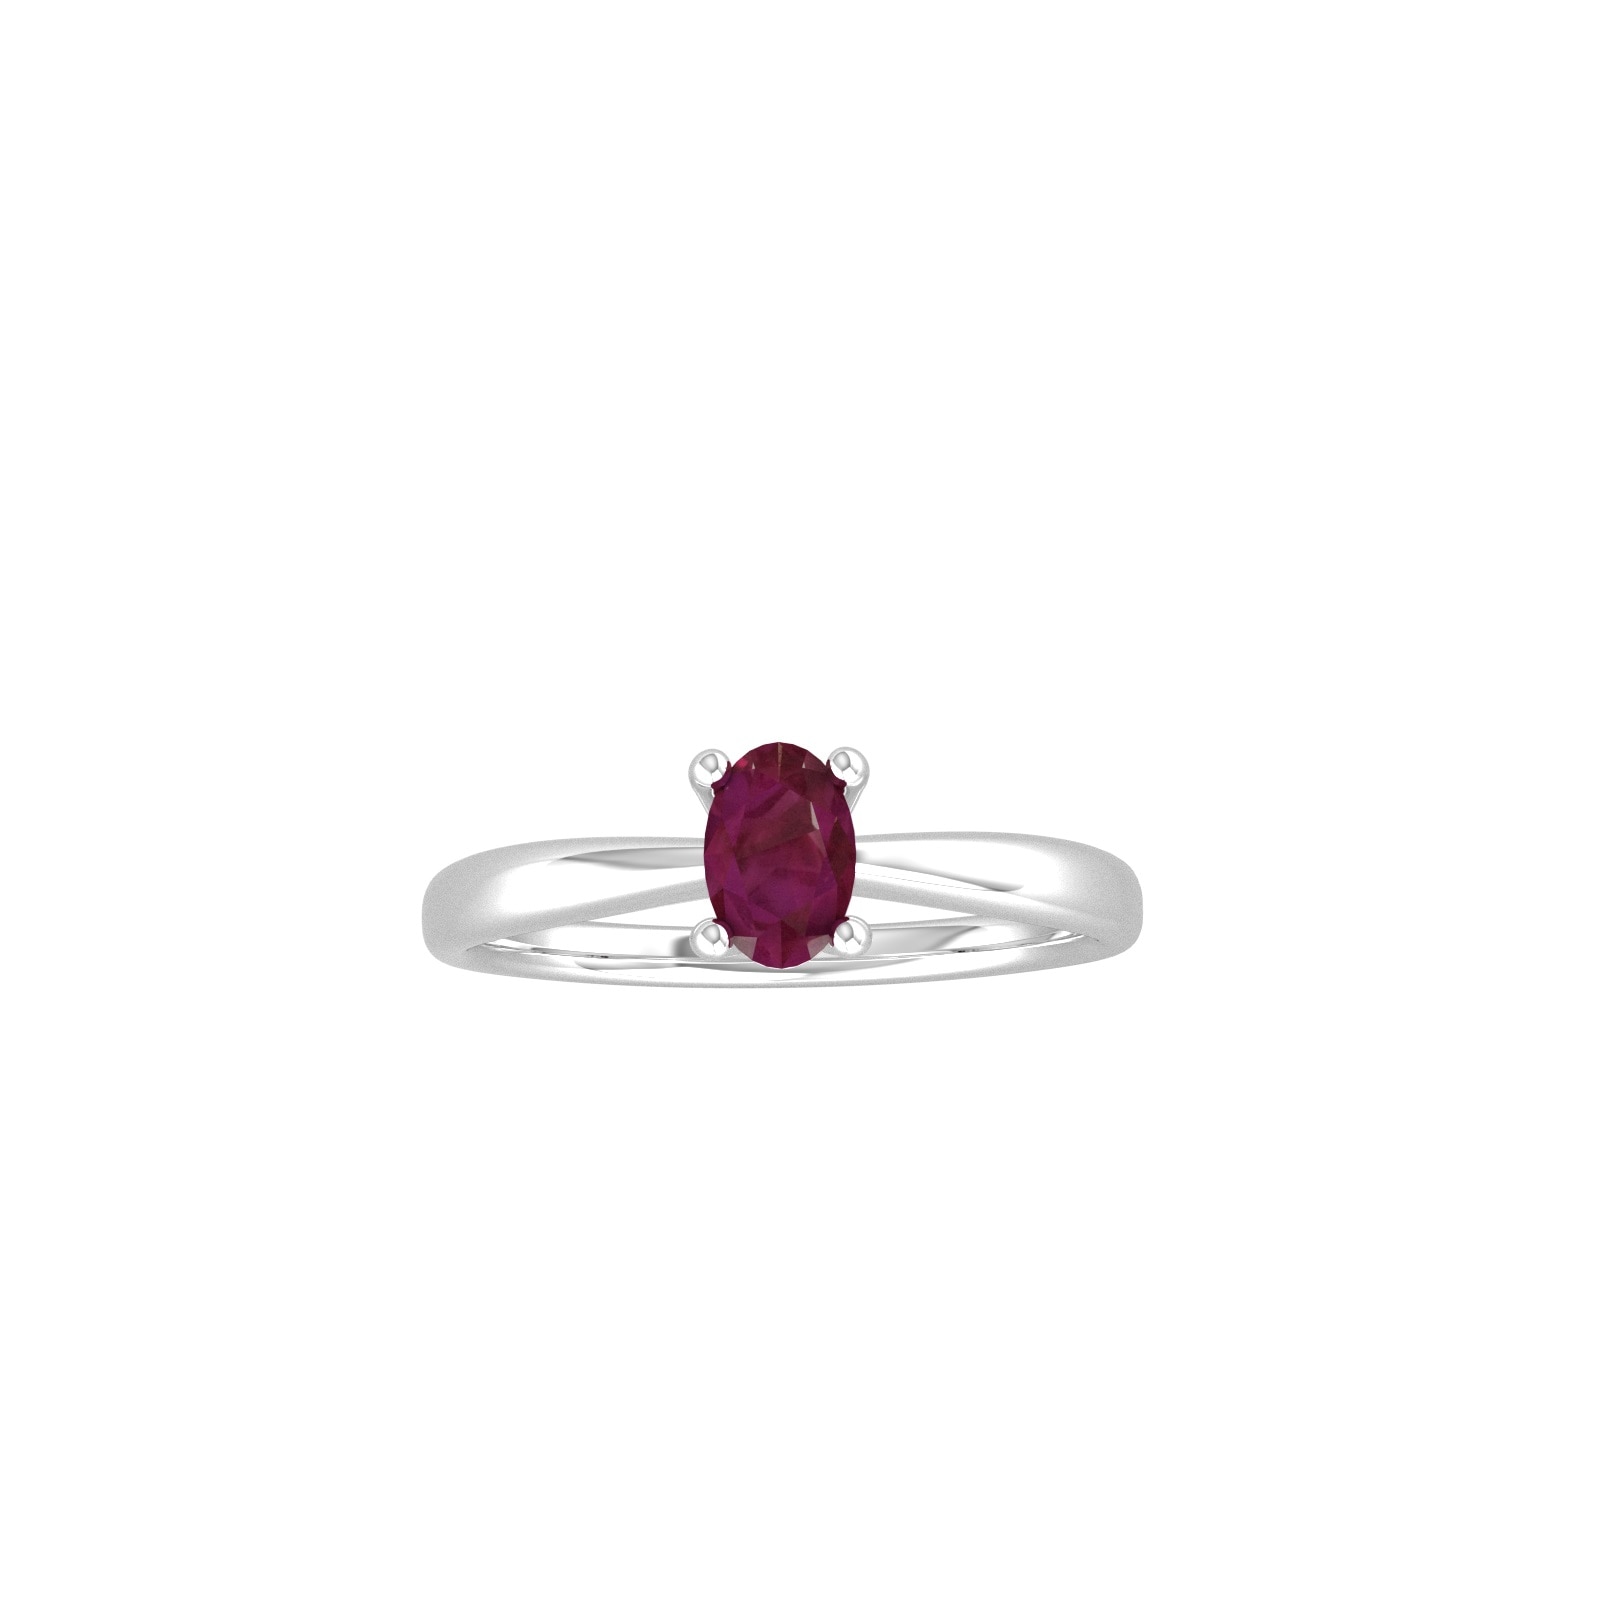 9ct White Gold 4 Claw Oval Ruby Ring